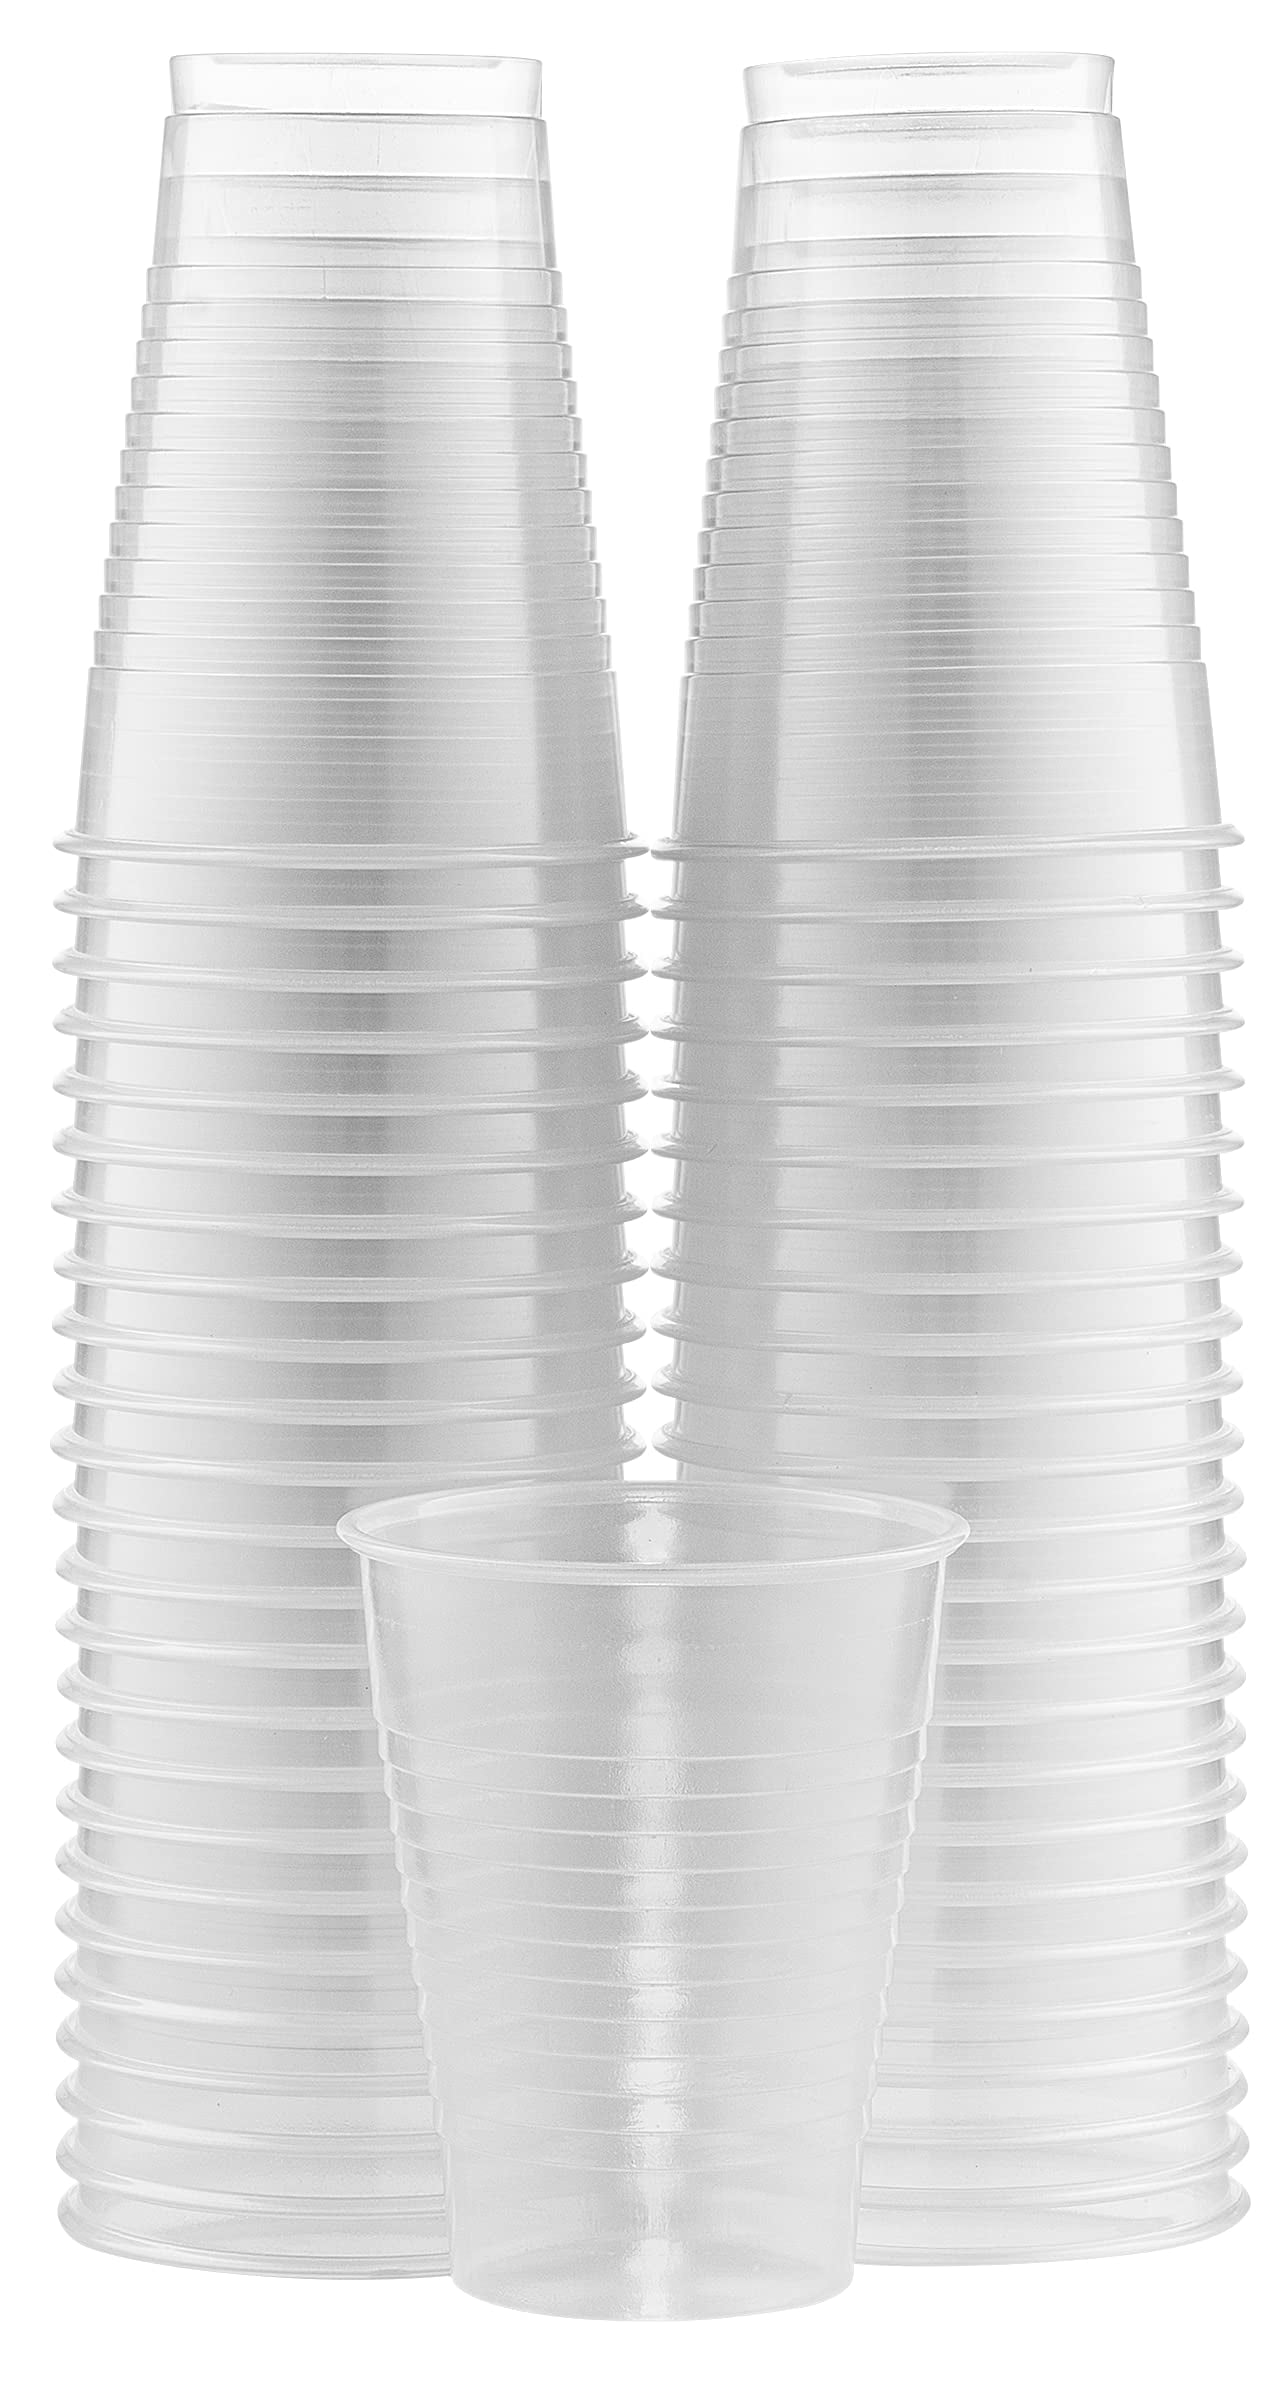 Amcrate Red Colored 12 oz Disposable Plastic Party Cups (Pack of 50)